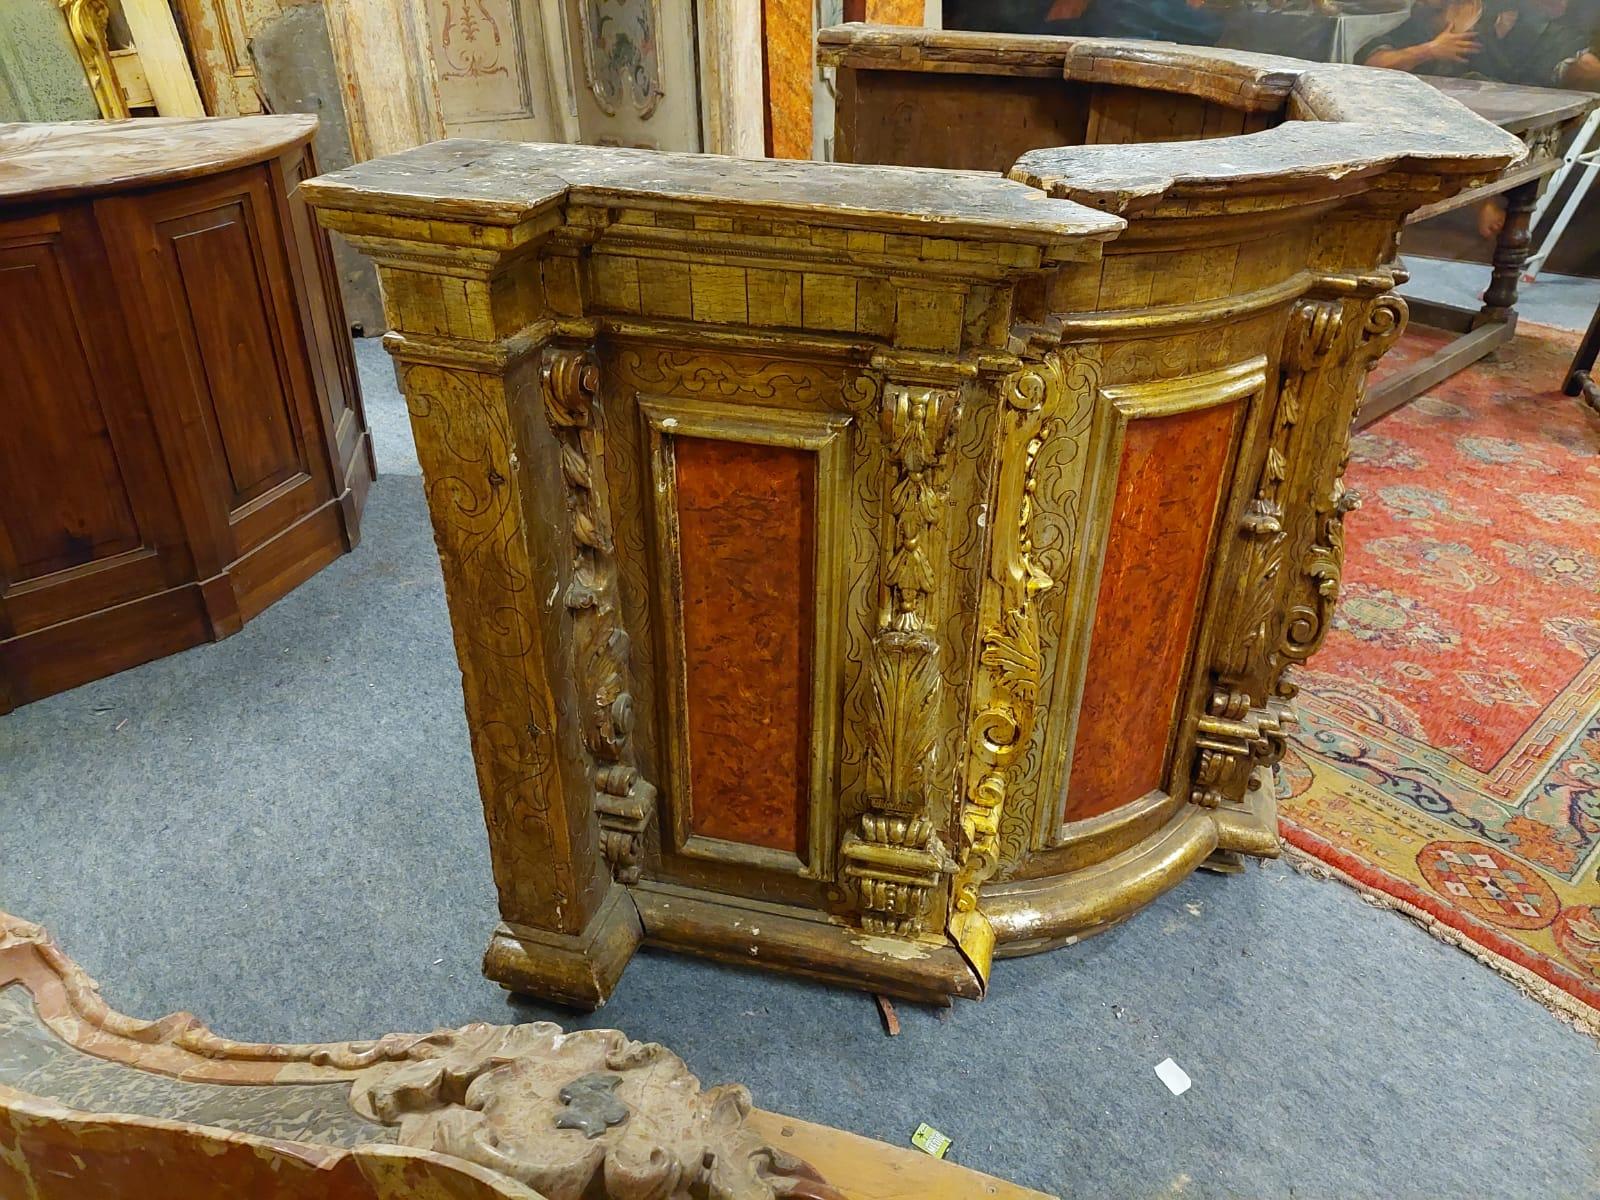 Italian Antique Counter-Church Pulpit in Gilded Richly Carved Wood, 16th Century Italy